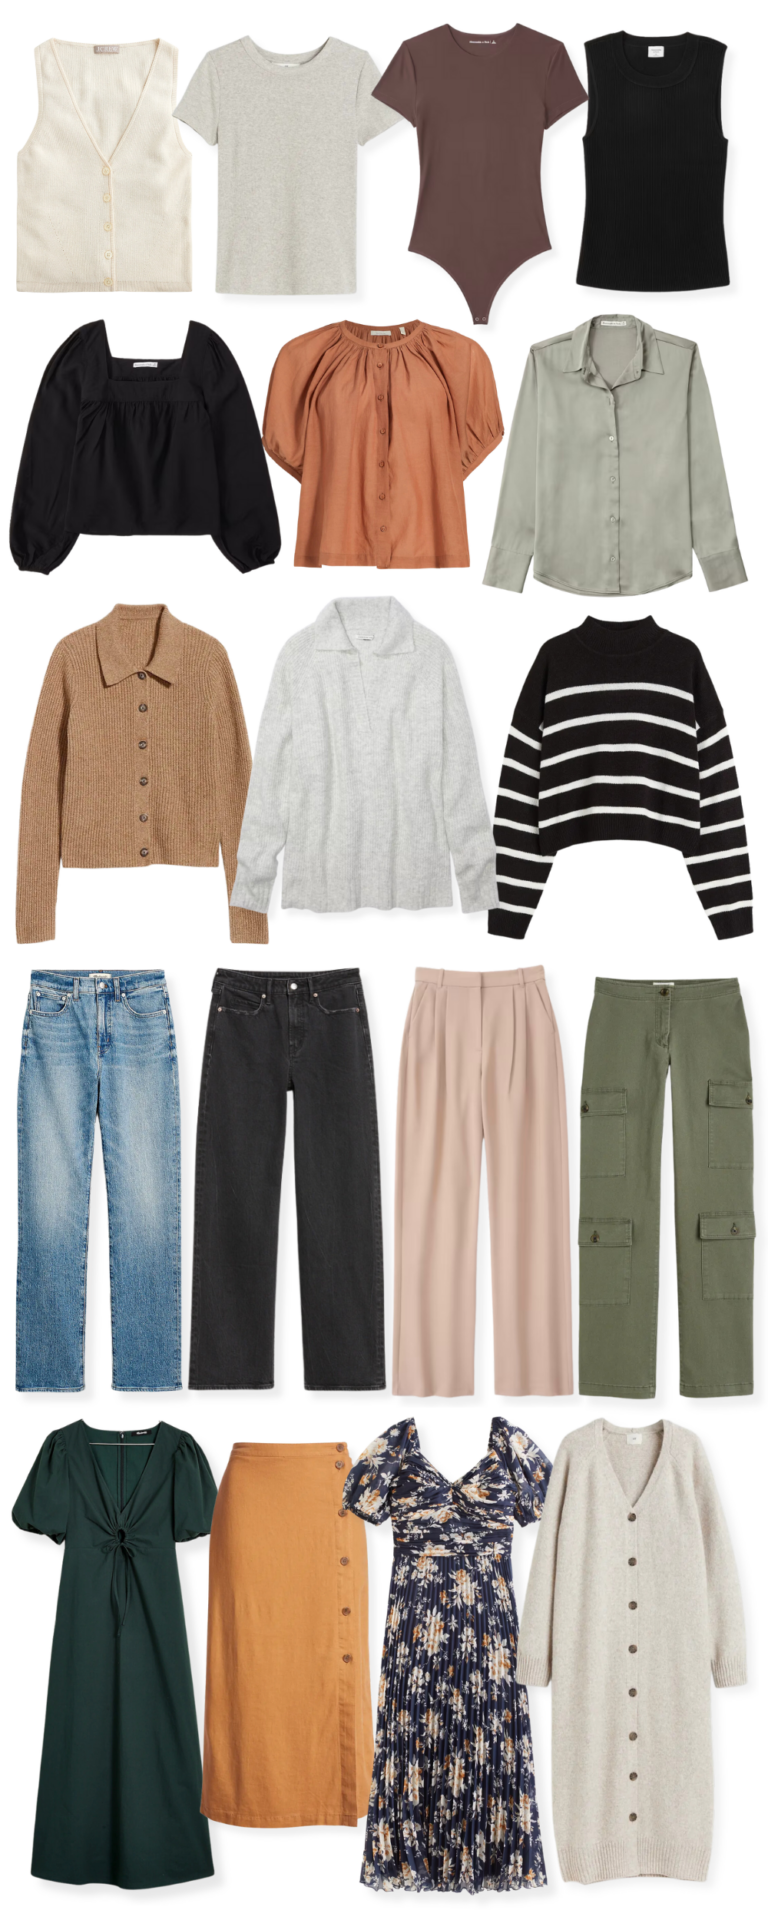 sweaters, tees, bodysuits, blouses, jeans, trousers, dresses and skirts for a fall capsule wardrobe